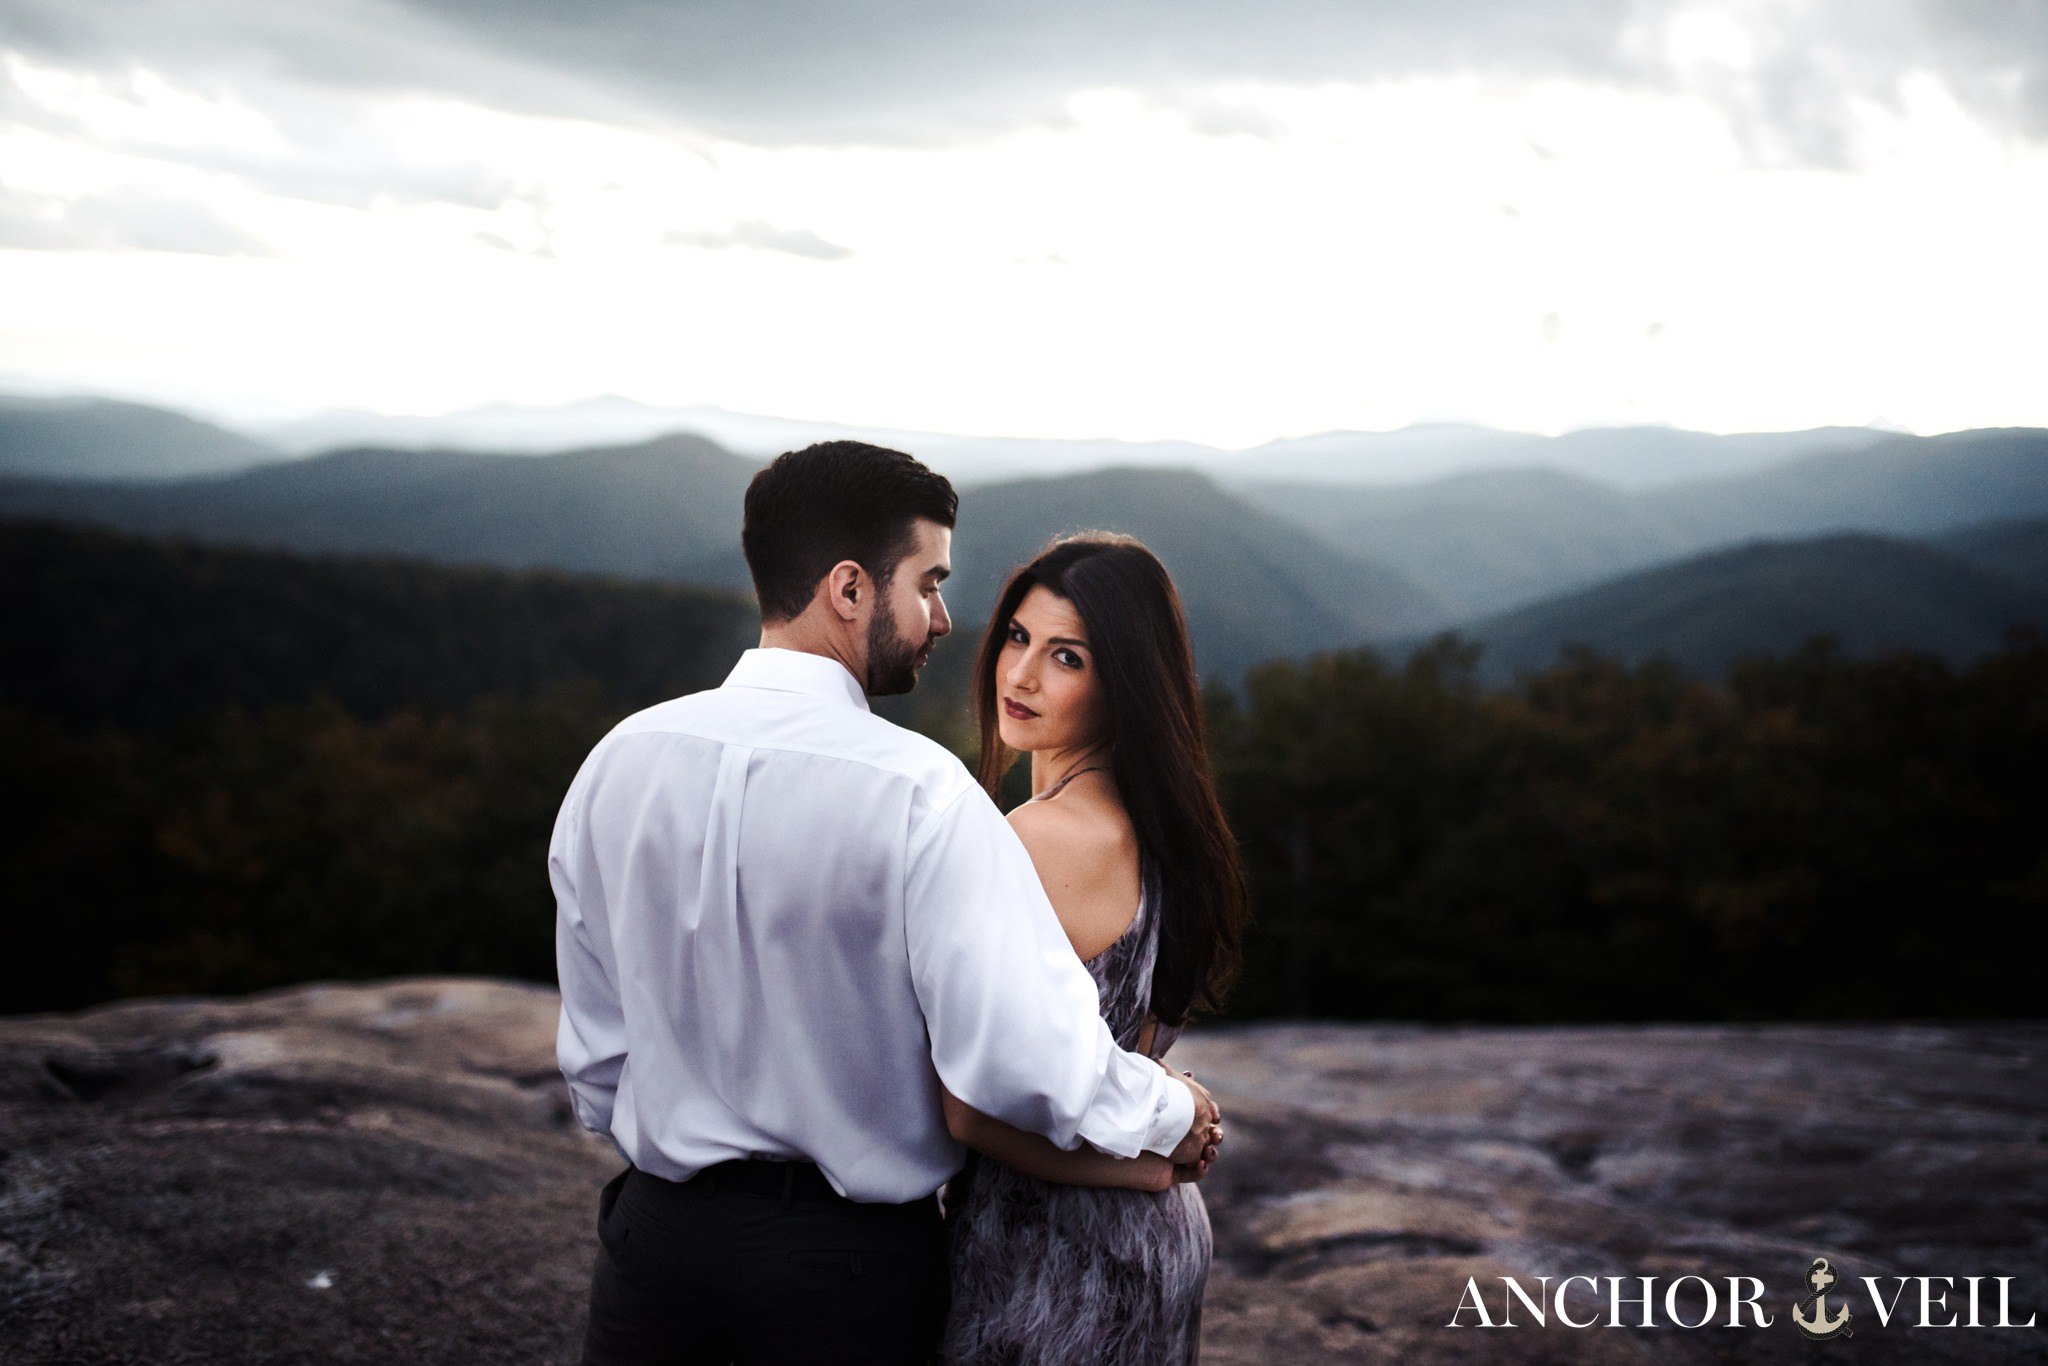 holding her facing the camera during the Stone Mountain Engagement Session